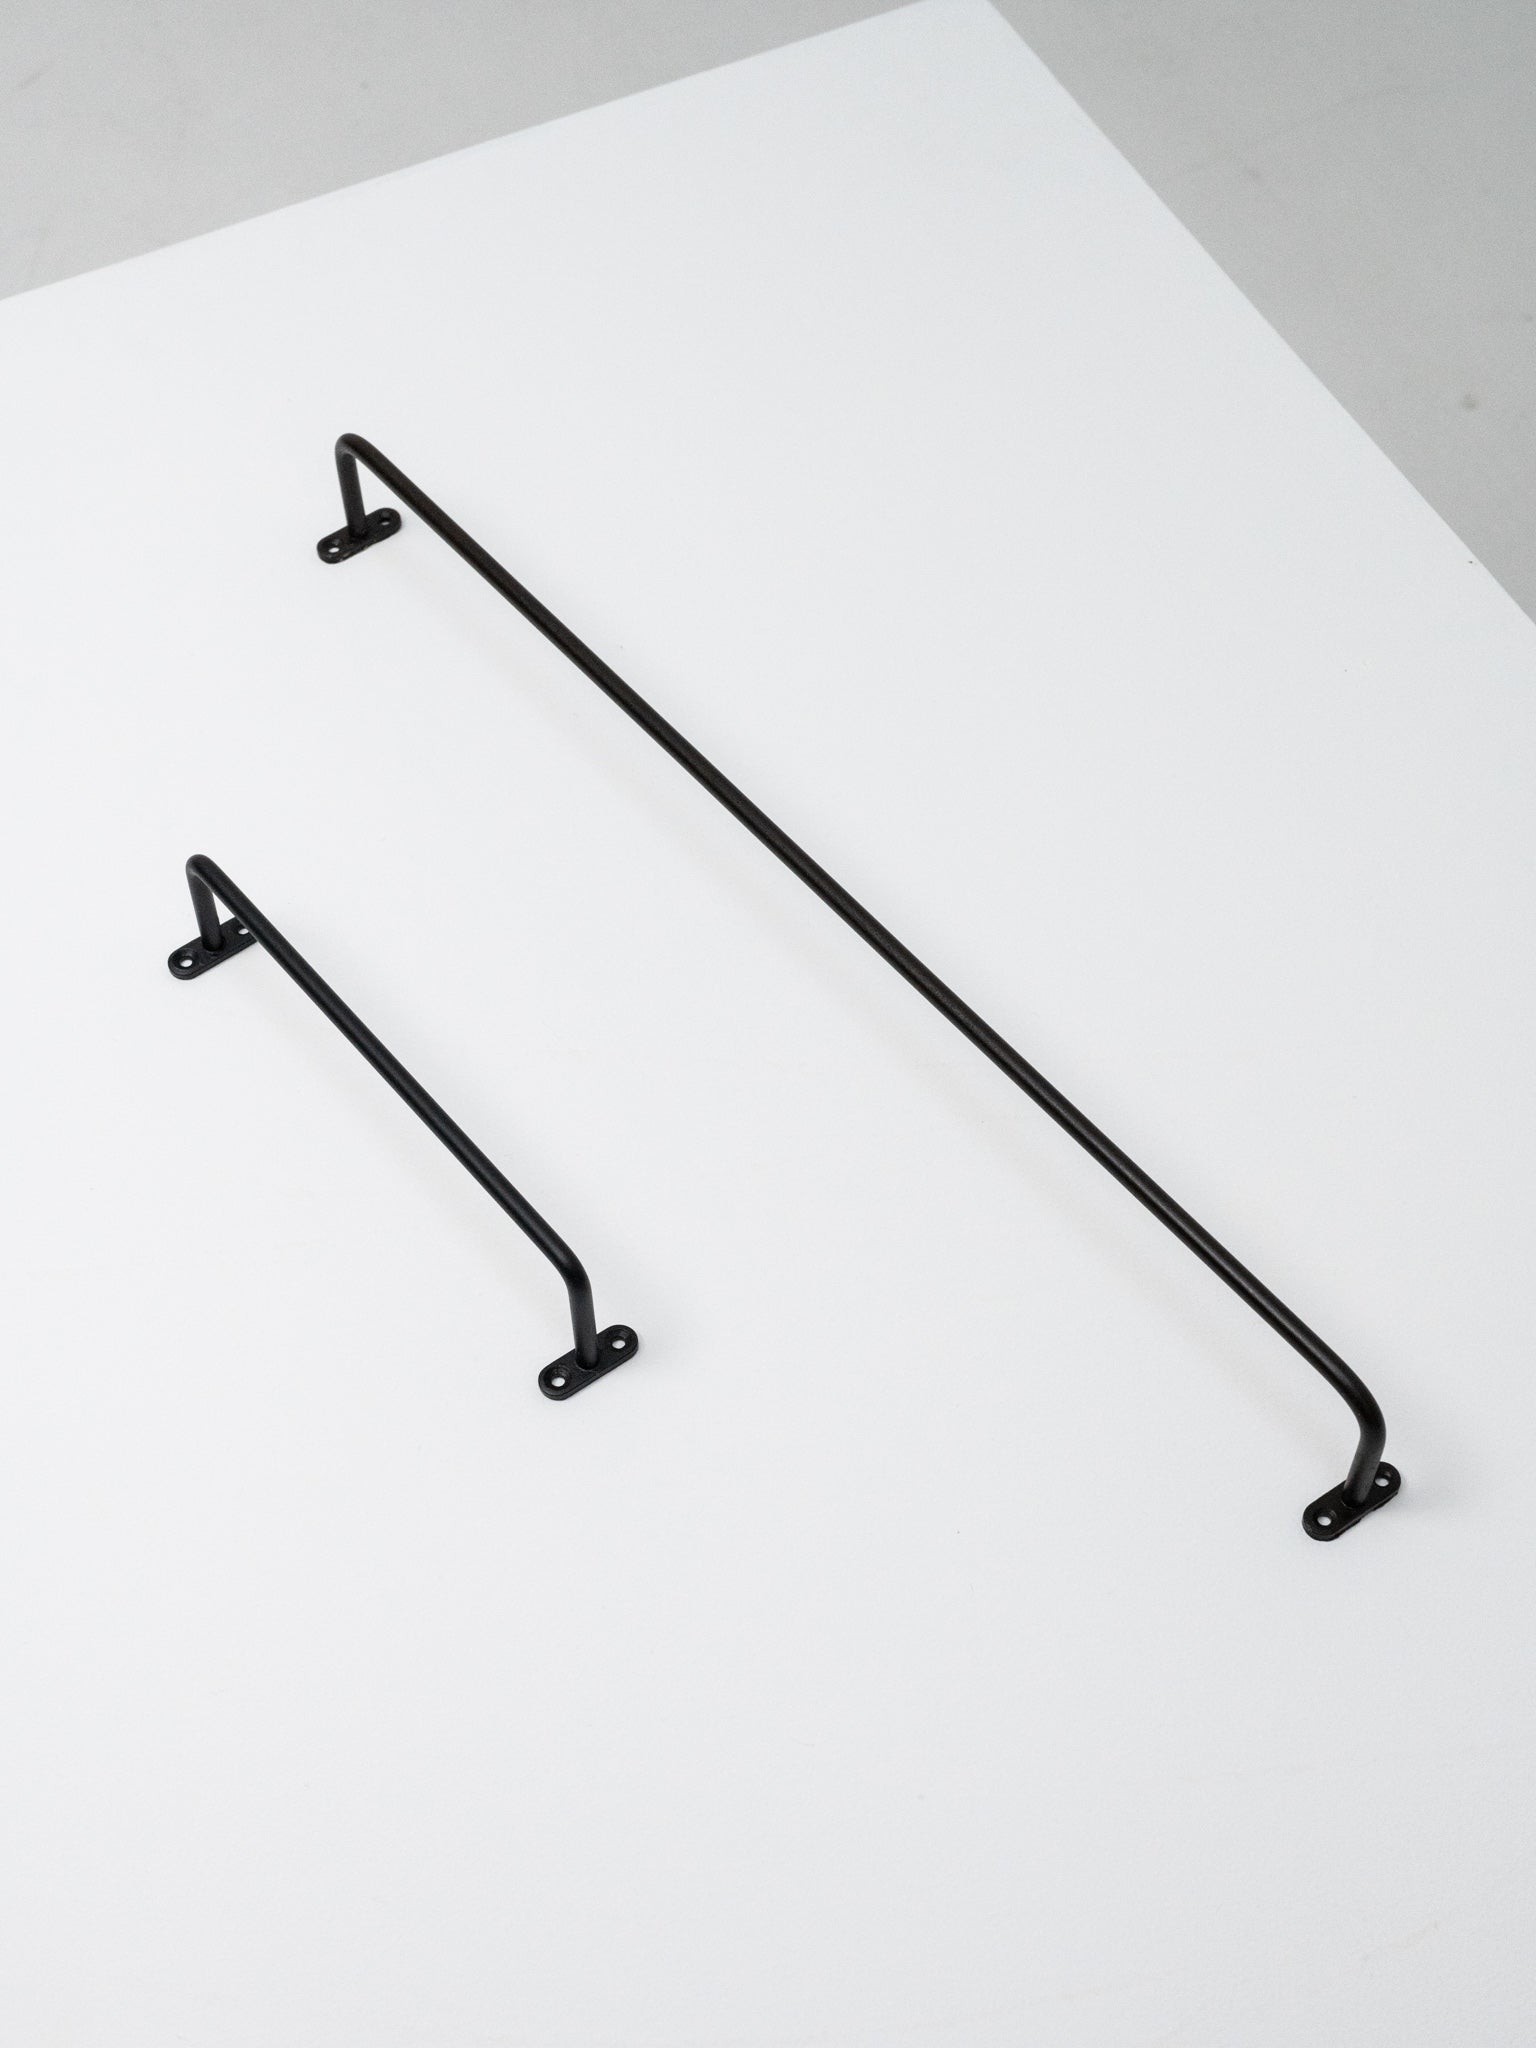 Iron Rail for hooks or towels, (two size options)